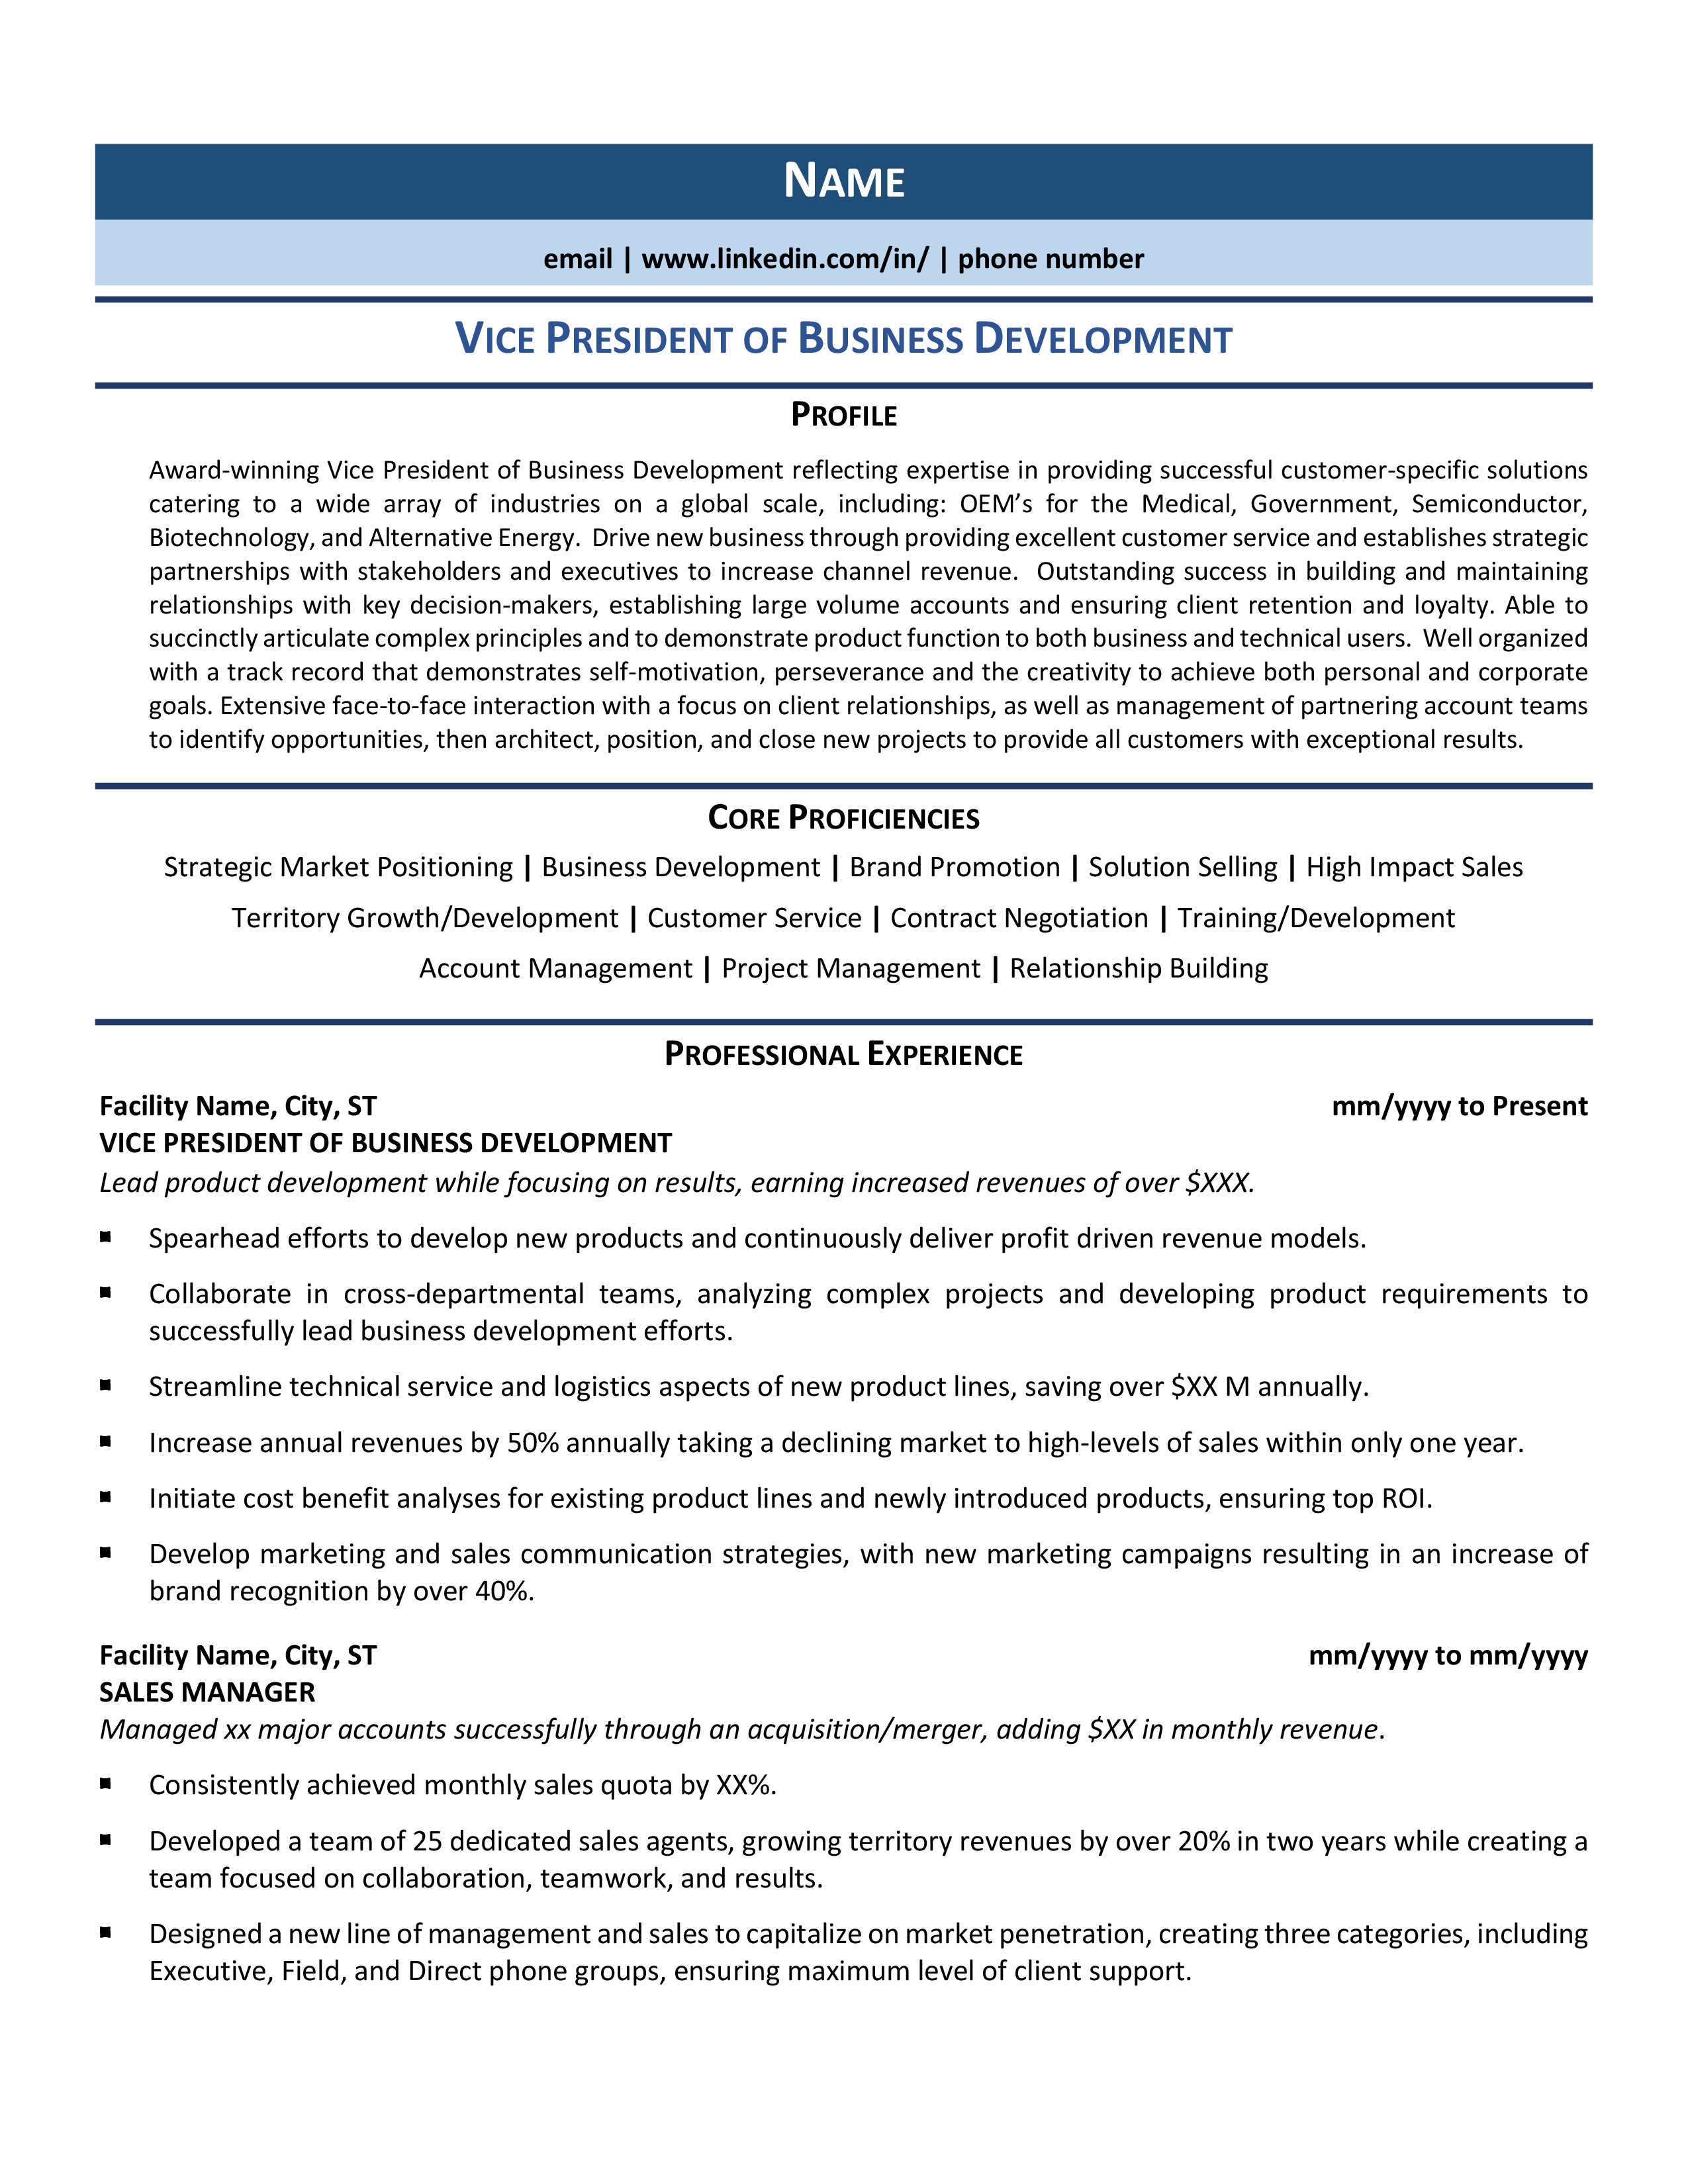 Vice President of Business Development Resume Example & Guide (2021